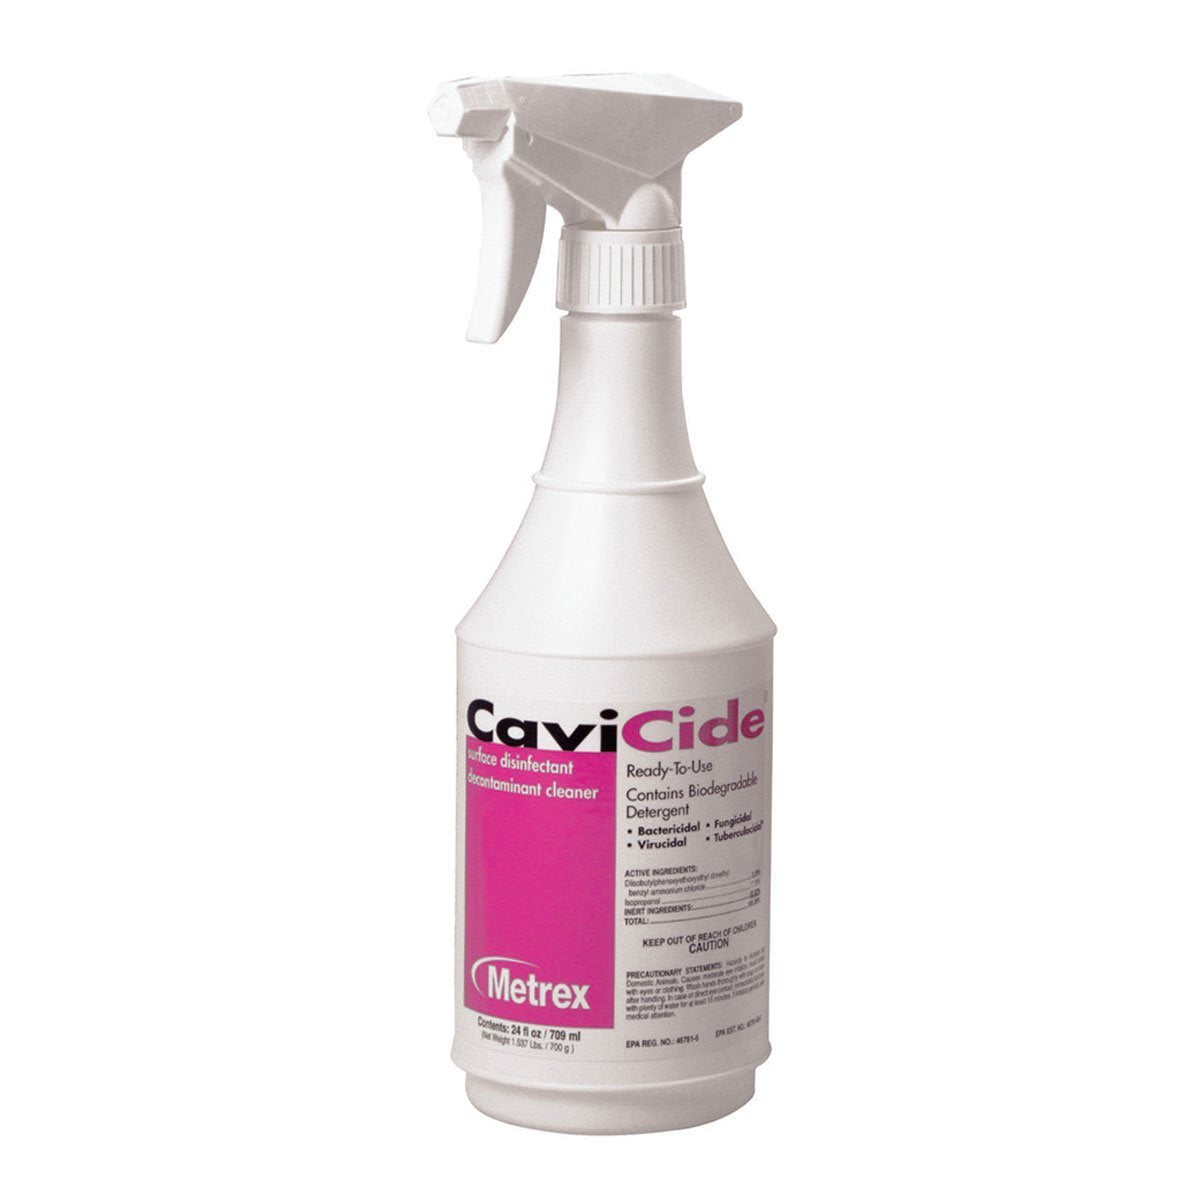 Cavicide Surface Disinfectant